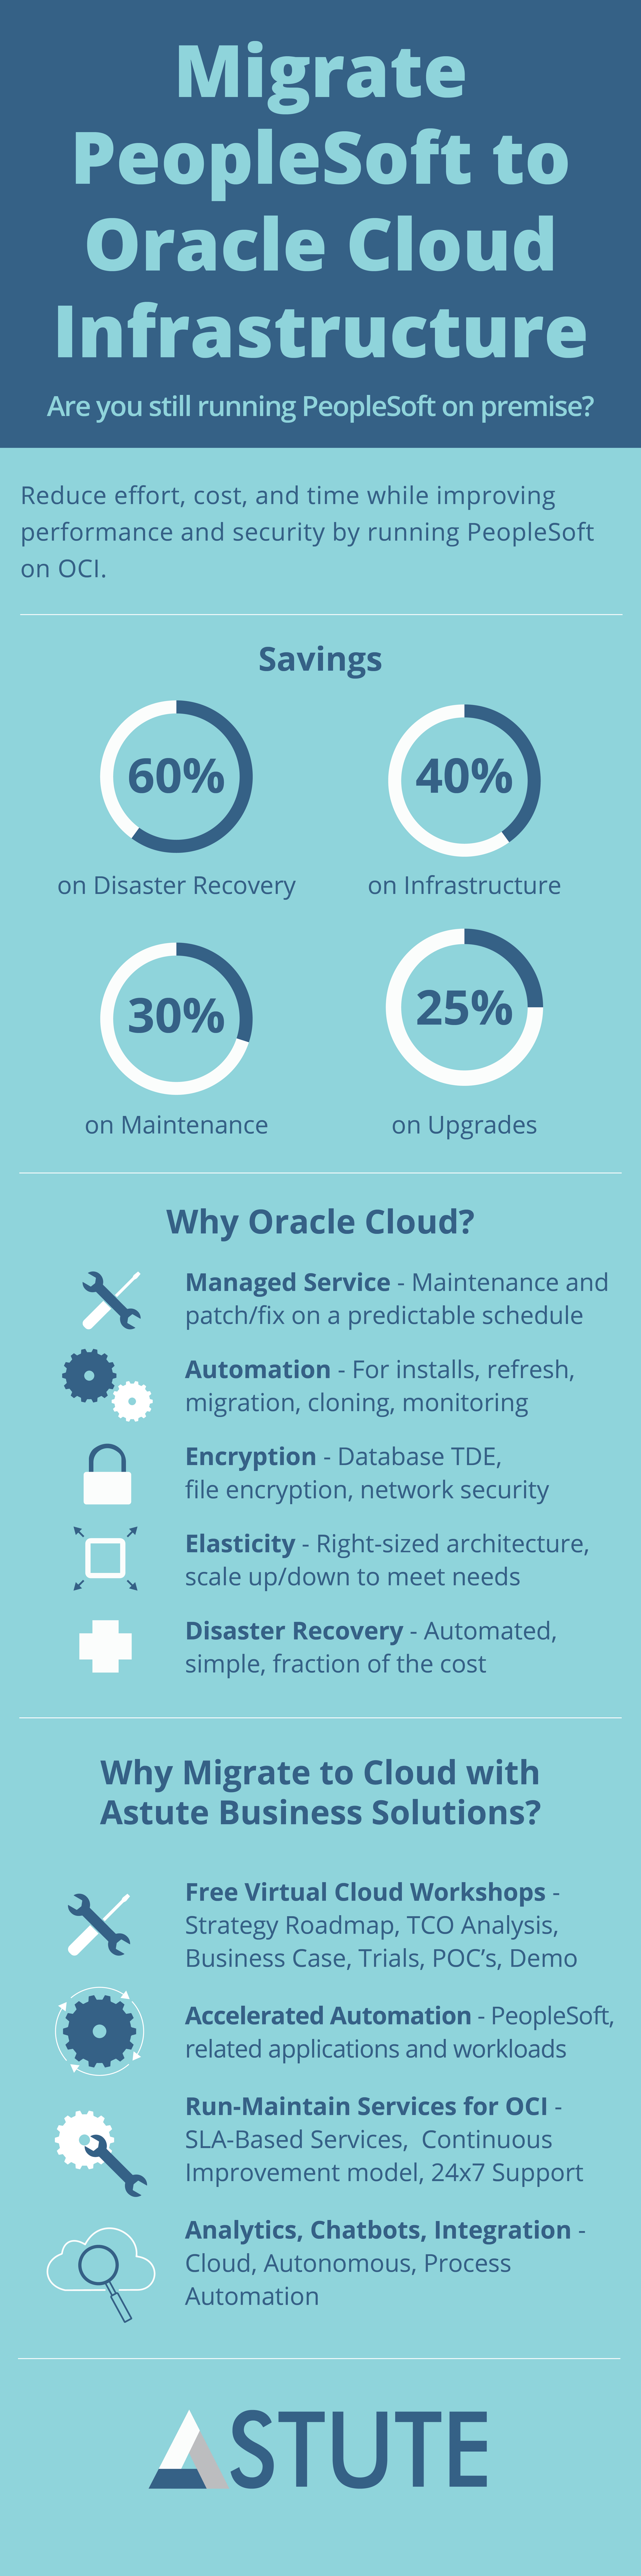 Why Migrate PeopleSoft to Oracle Cloud Infrastructure?